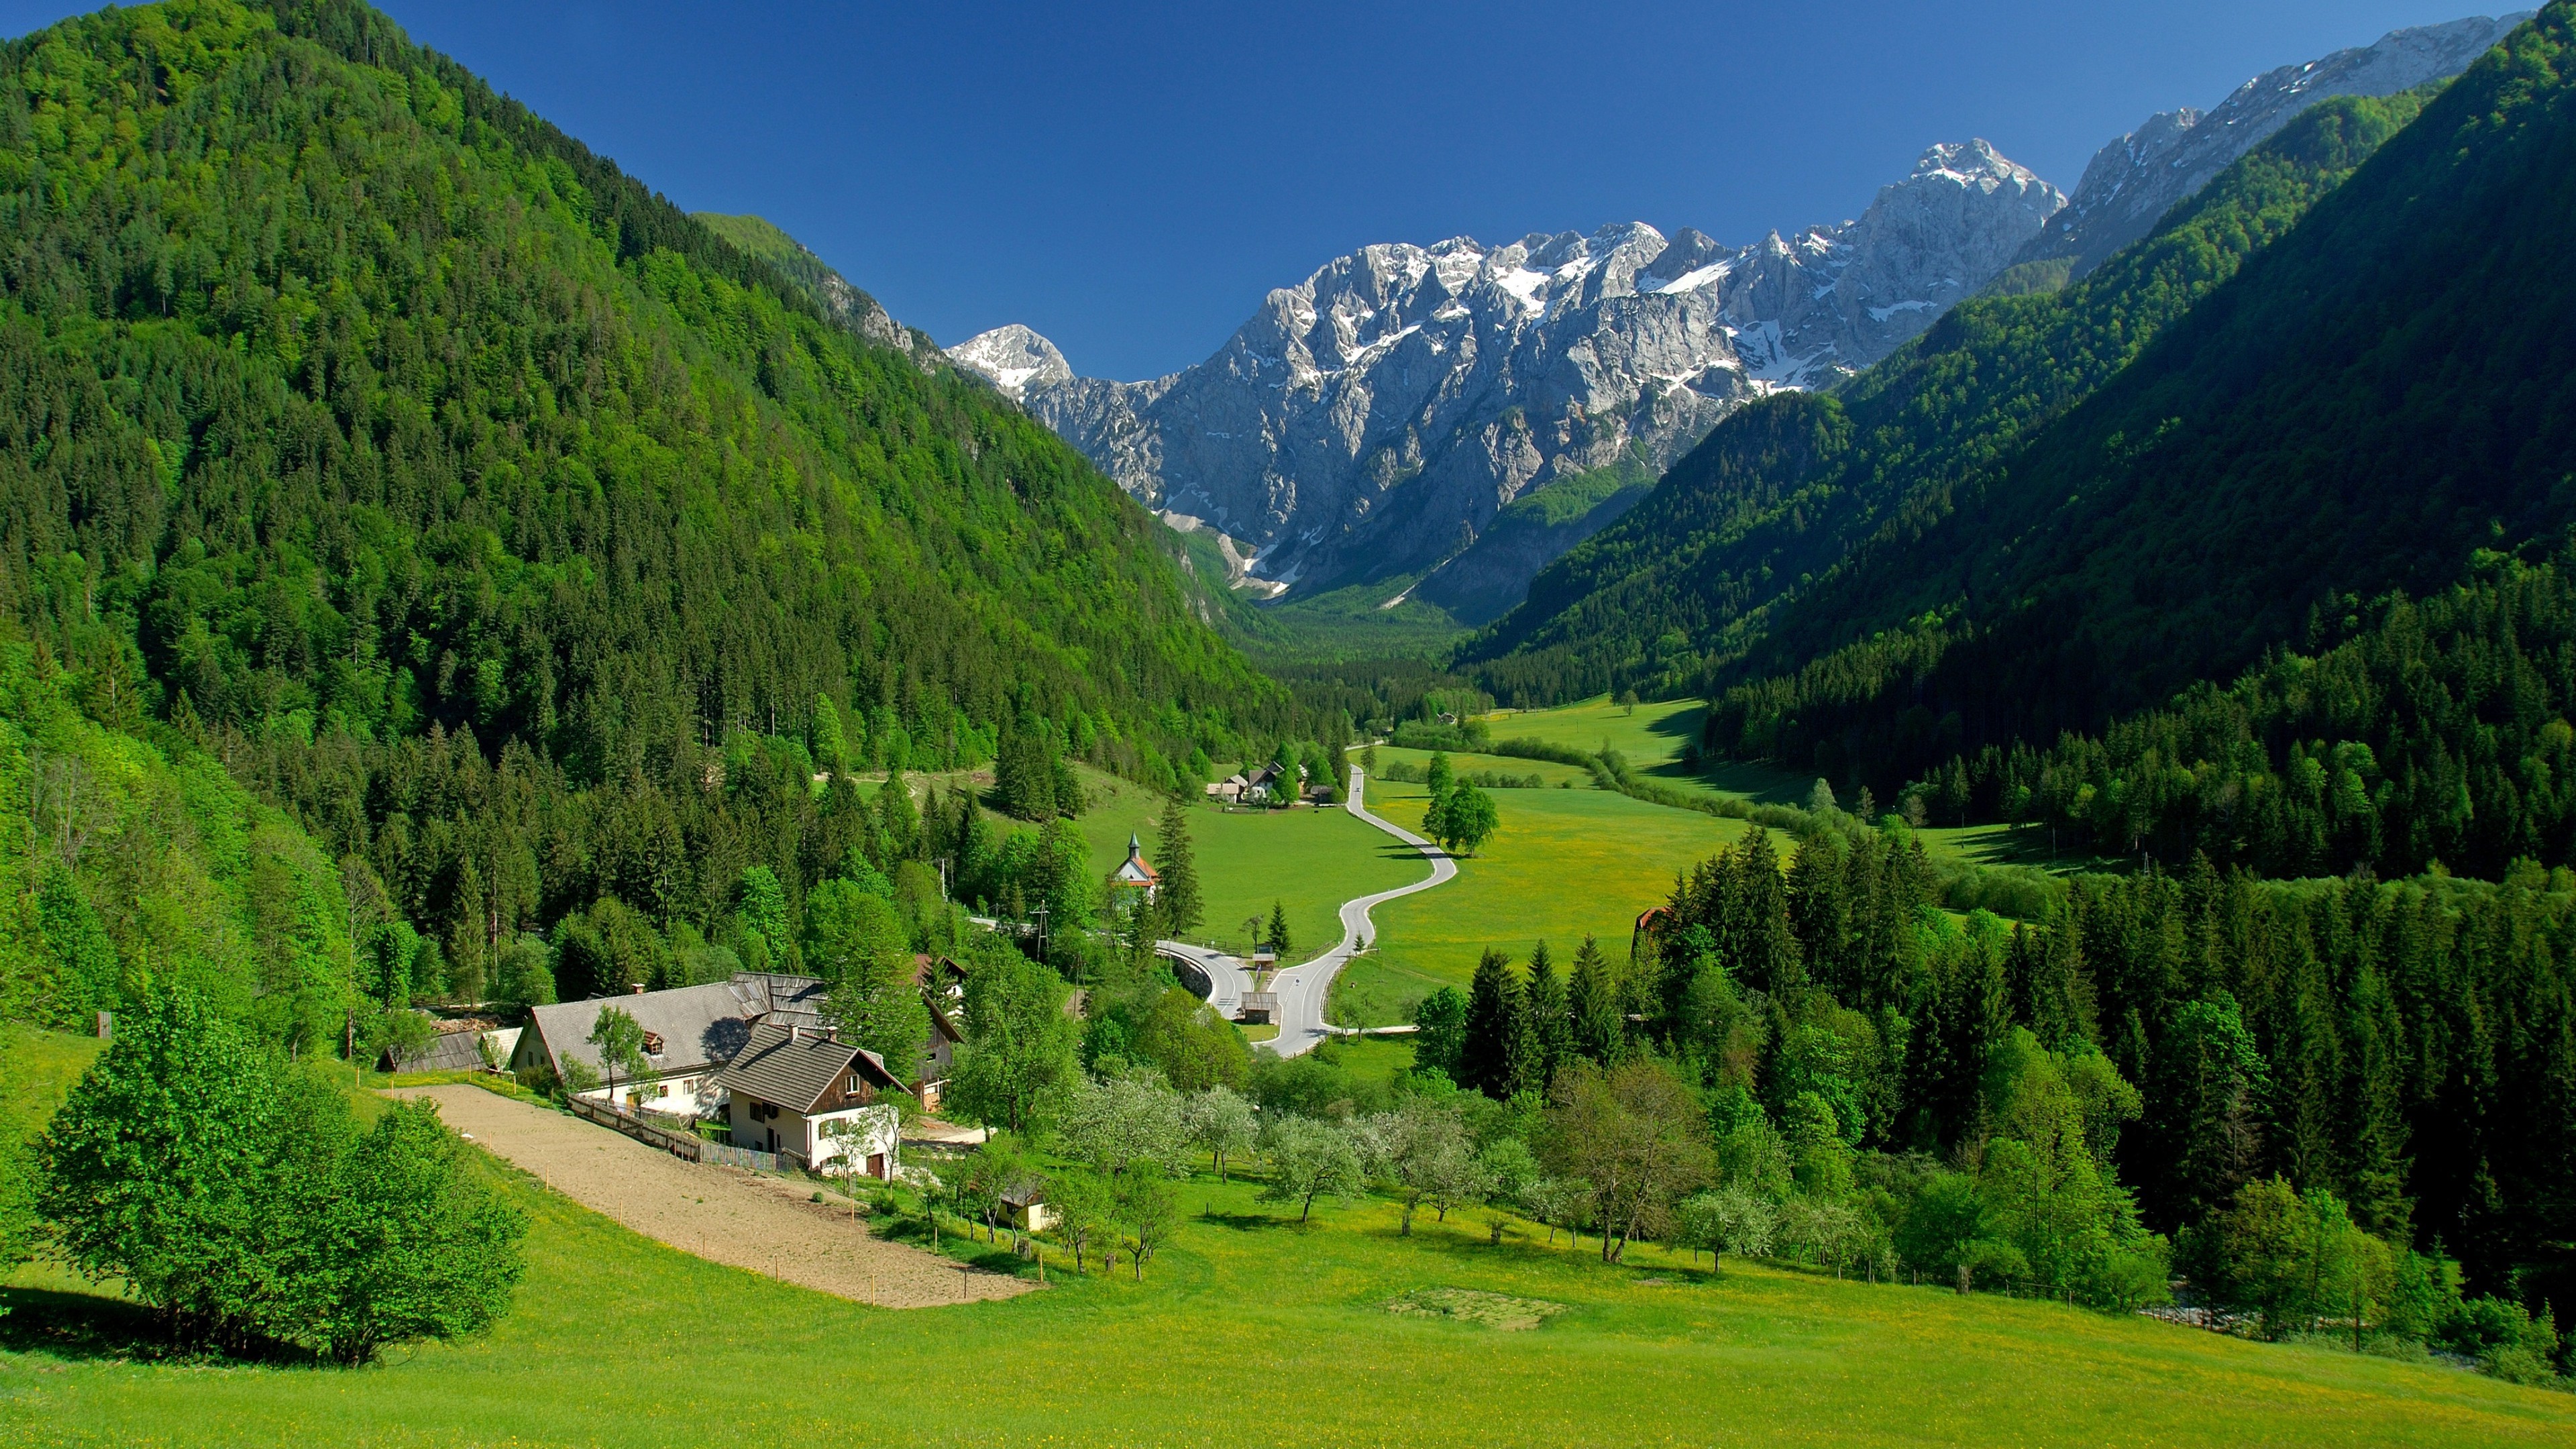 landscape, Village, Hills, Mountains, Trees, Hairpin Turns, Alps